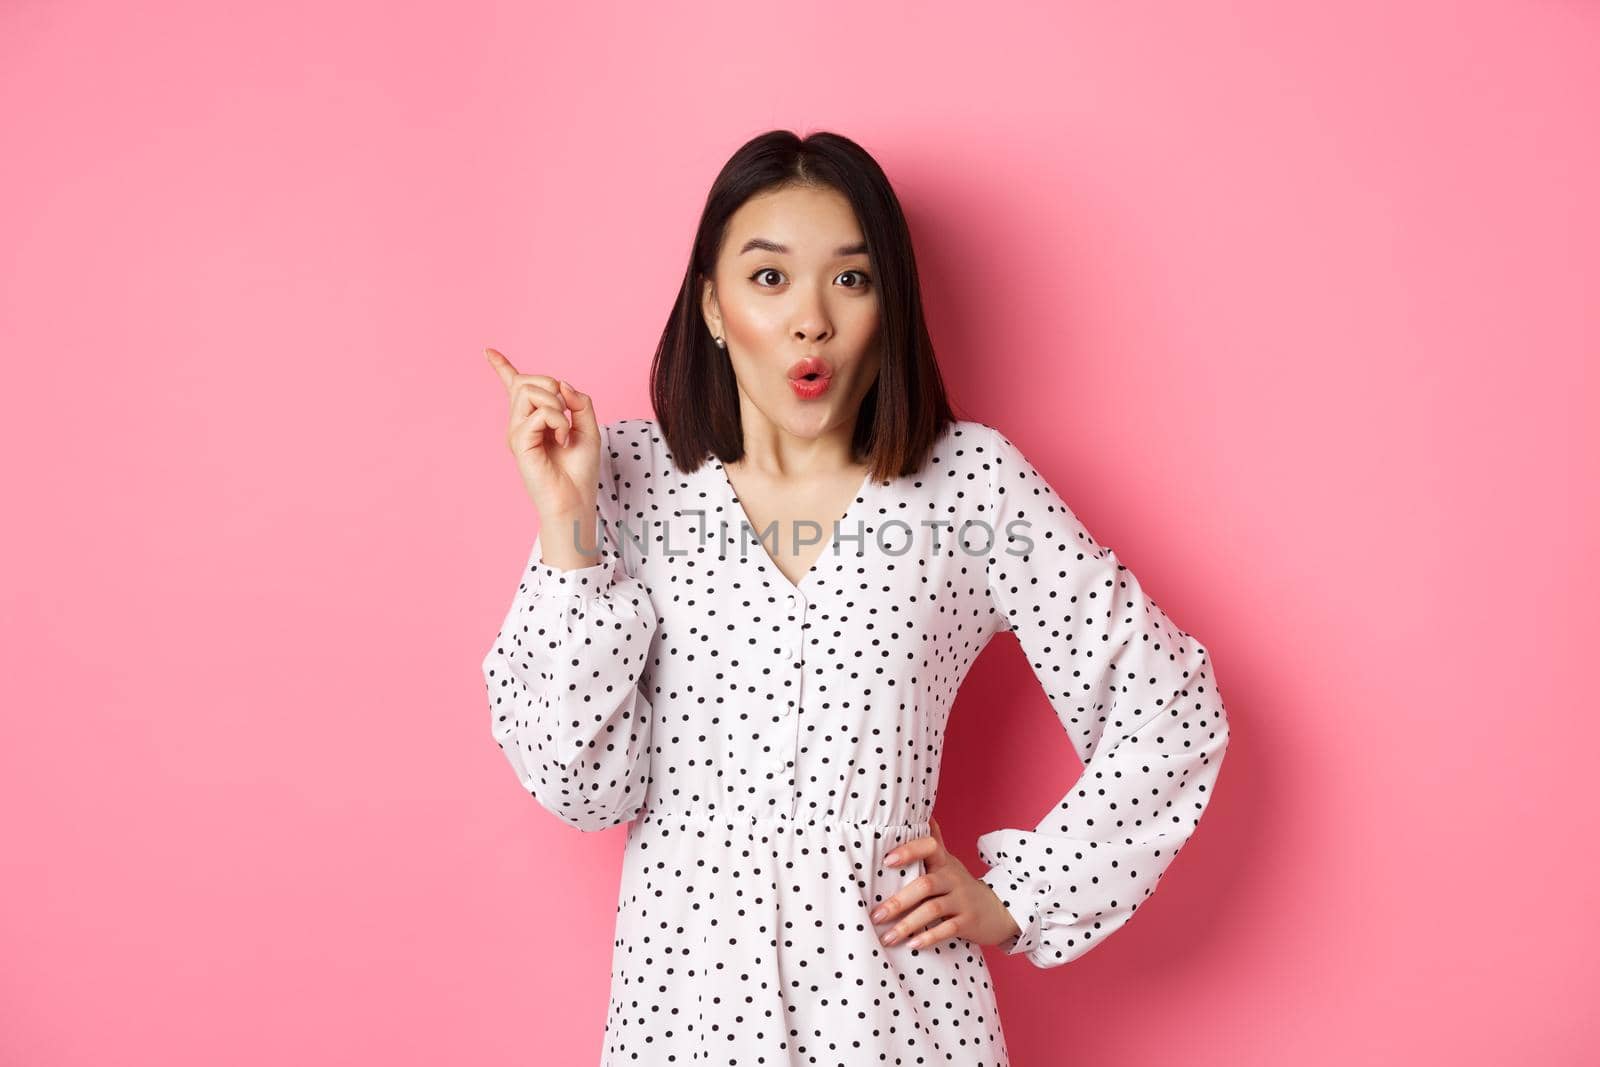 Excited asian female model showing promo offer, pointing at upper left corner and staring at camera amazed, wearing trendy spring dress, standing over pink background.